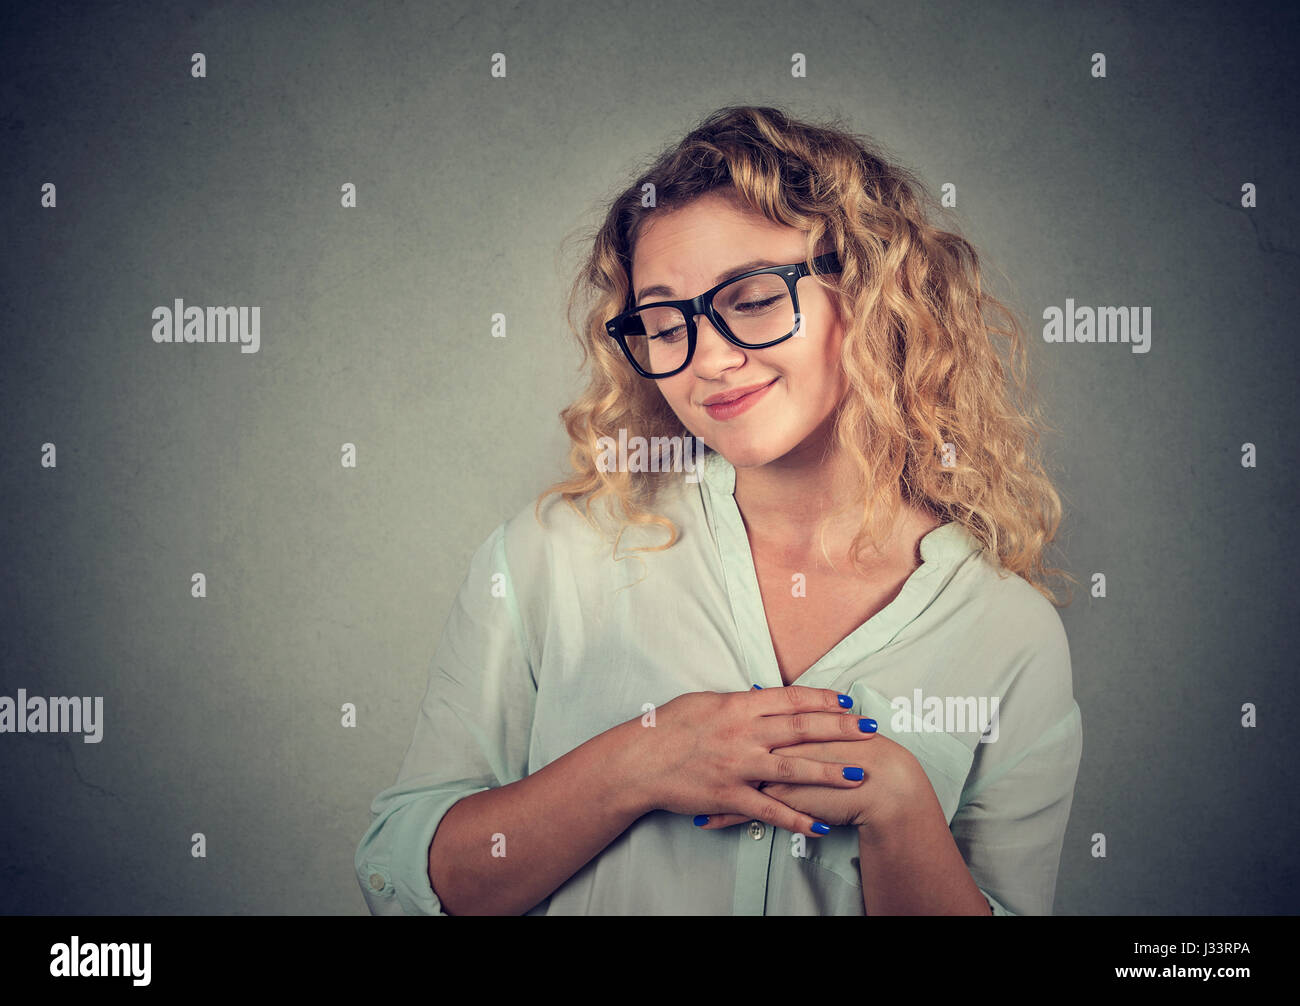 Lack of confidence. Shy young woman feels awkward isolated on grey wall background. Human emotion body language life perception Stock Photo